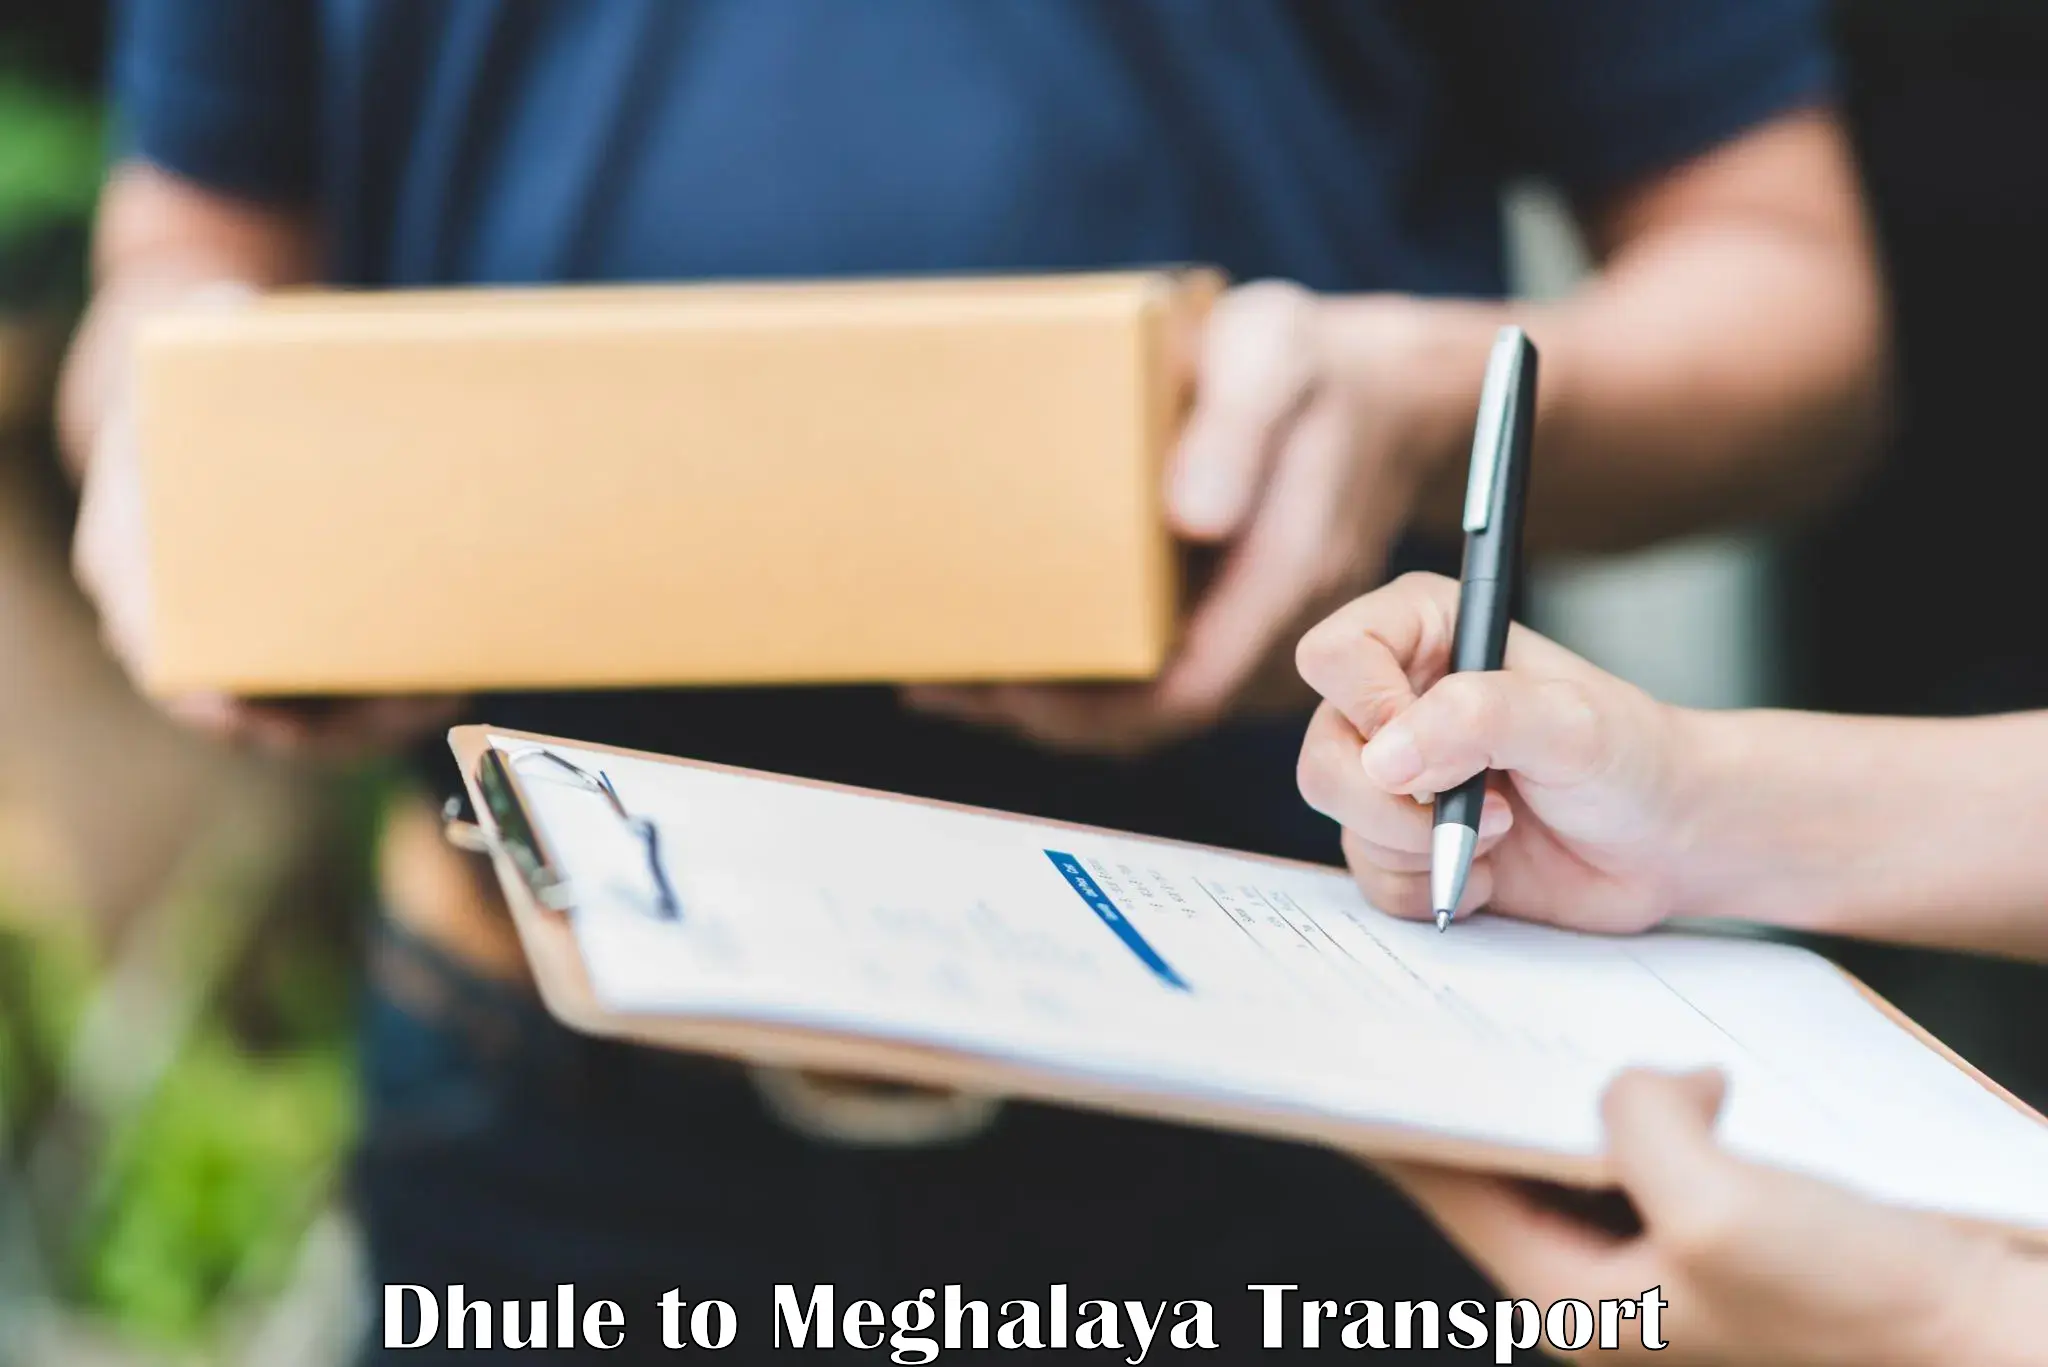 Pick up transport service Dhule to Shillong